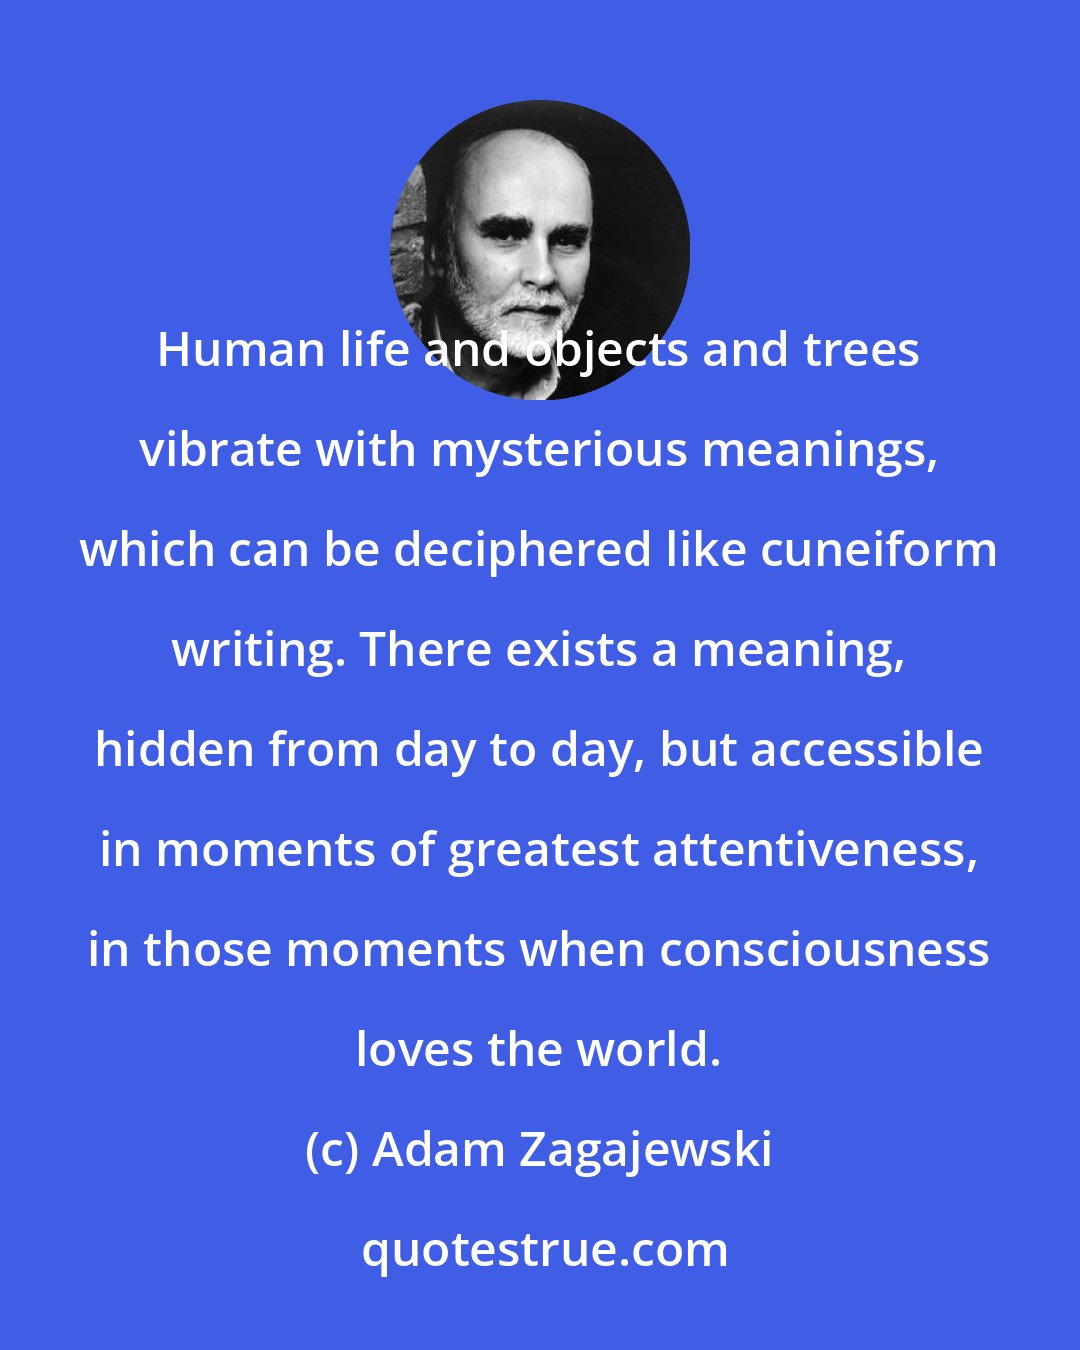 Adam Zagajewski: Human life and objects and trees vibrate with mysterious meanings, which can be deciphered like cuneiform writing. There exists a meaning, hidden from day to day, but accessible in moments of greatest attentiveness, in those moments when consciousness loves the world.